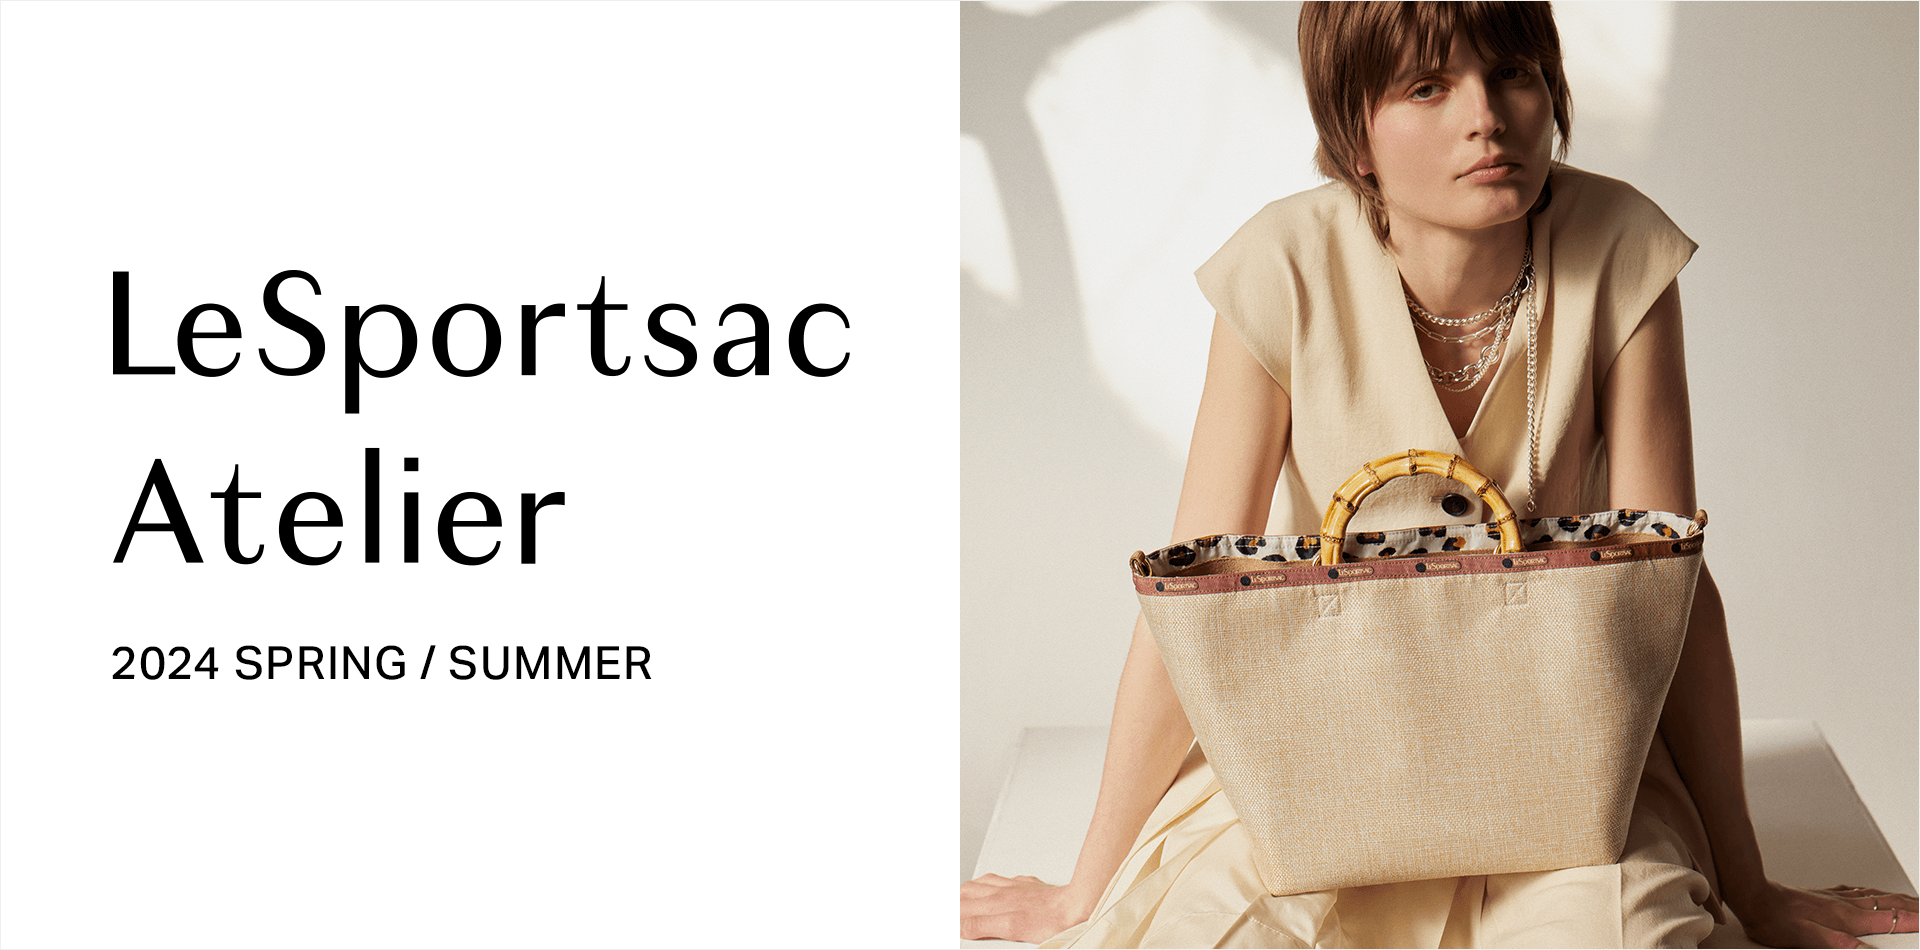 LeSportsac Atelier 2024 SPRING/SUMMER Collection